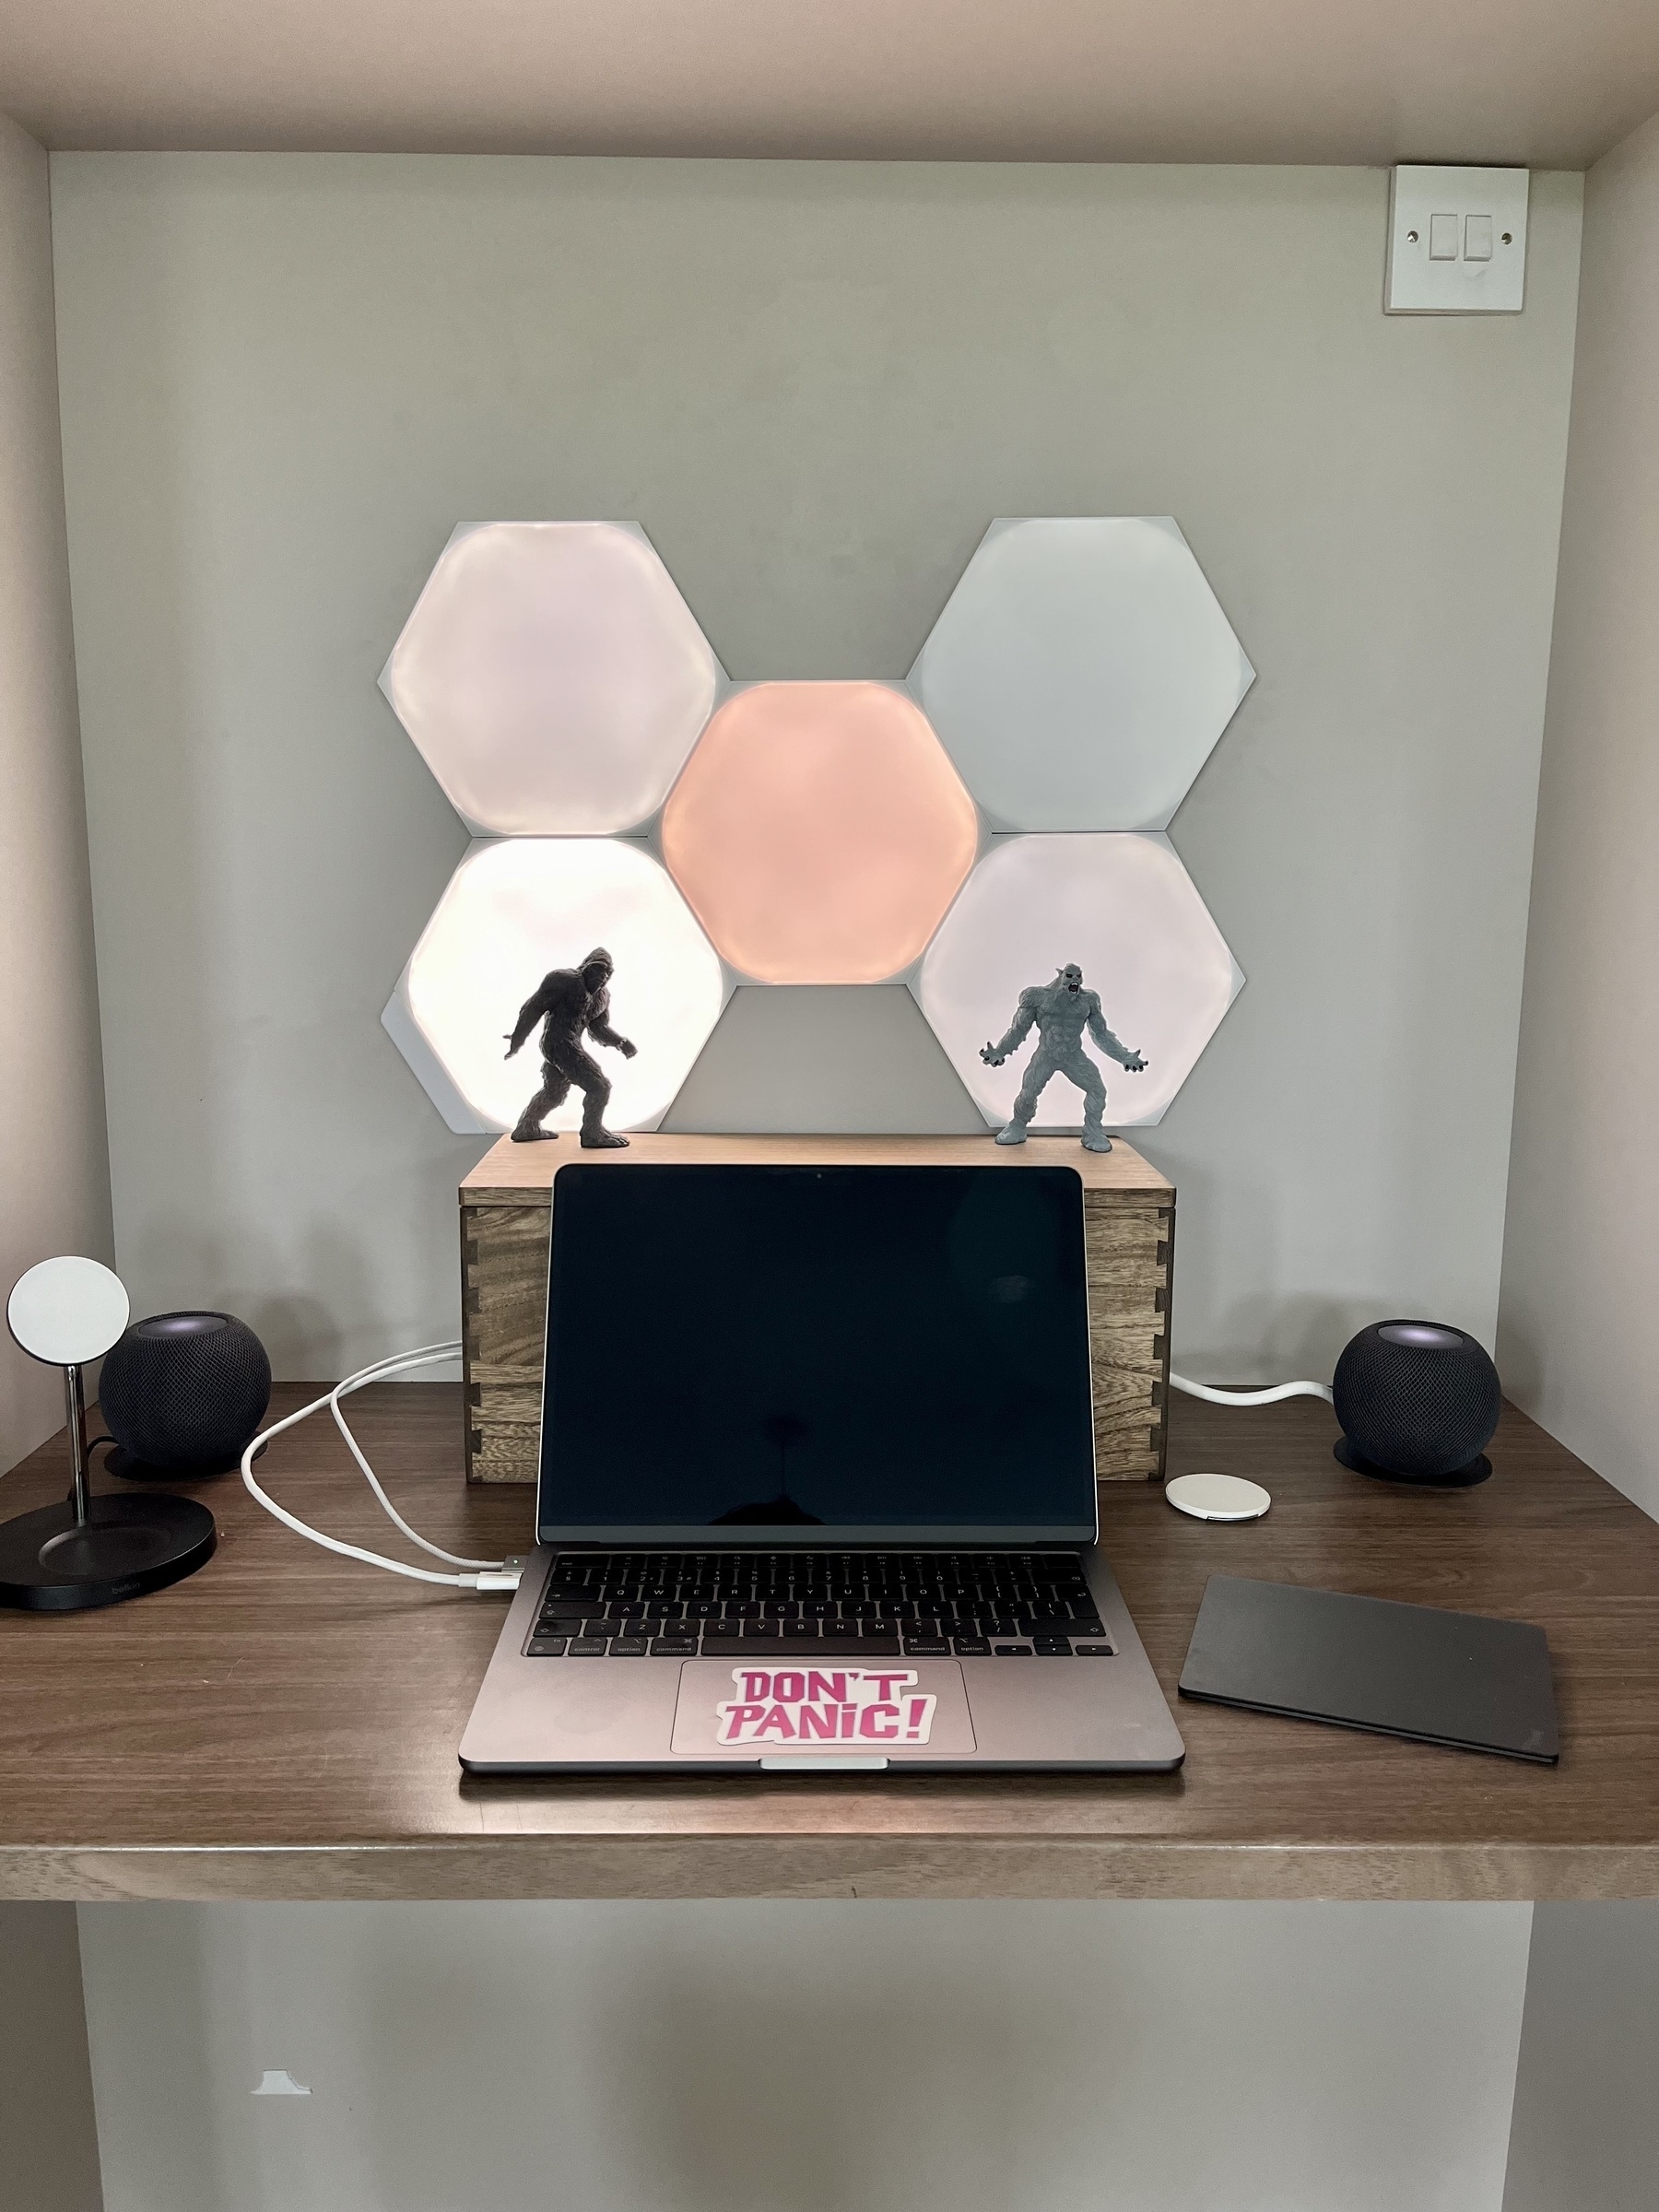 A MacBook computer sits below a wooden box, perched on which is a Sasquatch and yeti figure illuminated against lights. Circular HomePods sit each side of the box. 